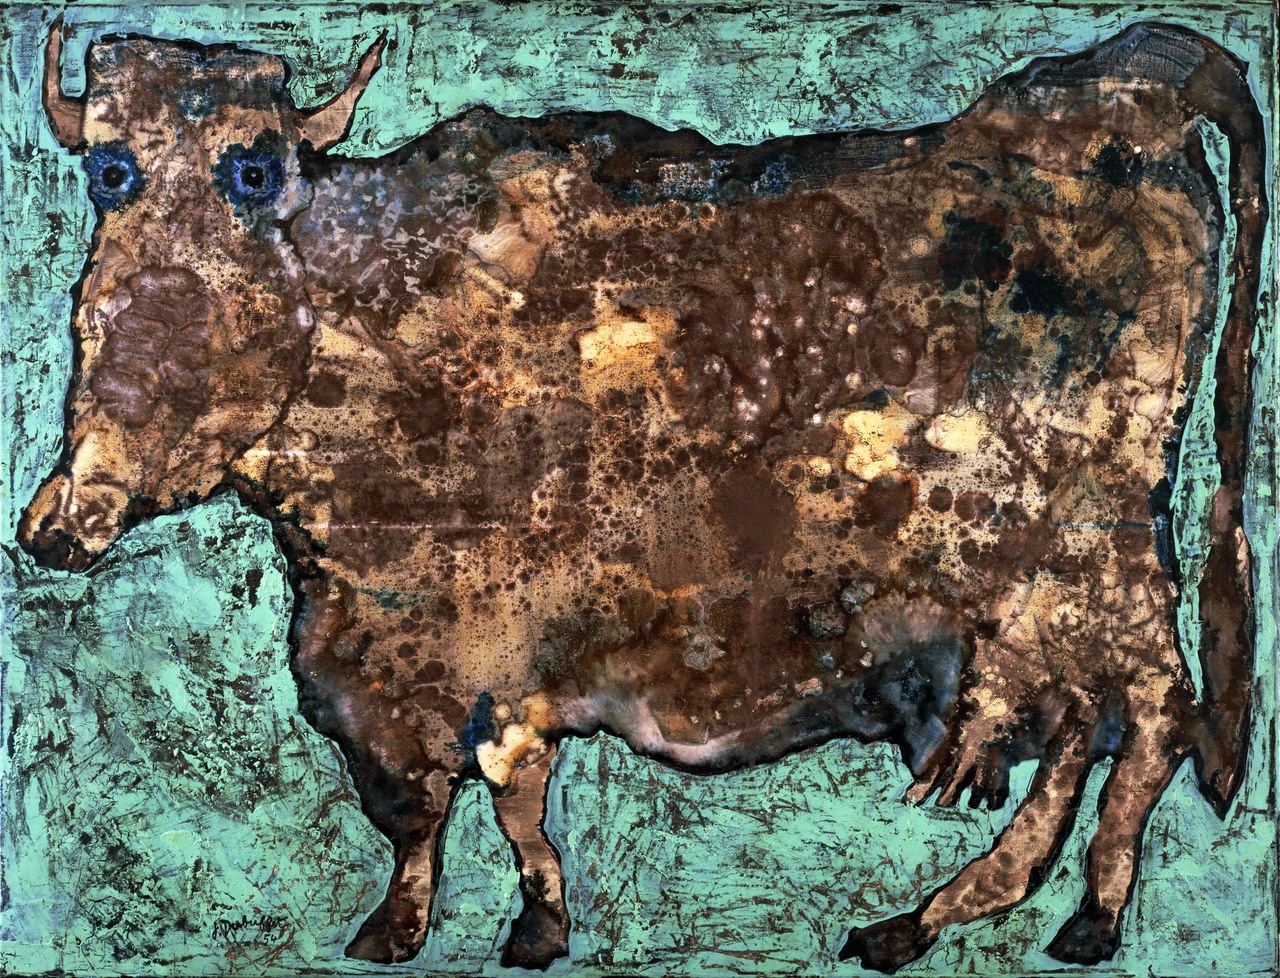 Jean Dubuffet - The Exemplary Life of the Soil